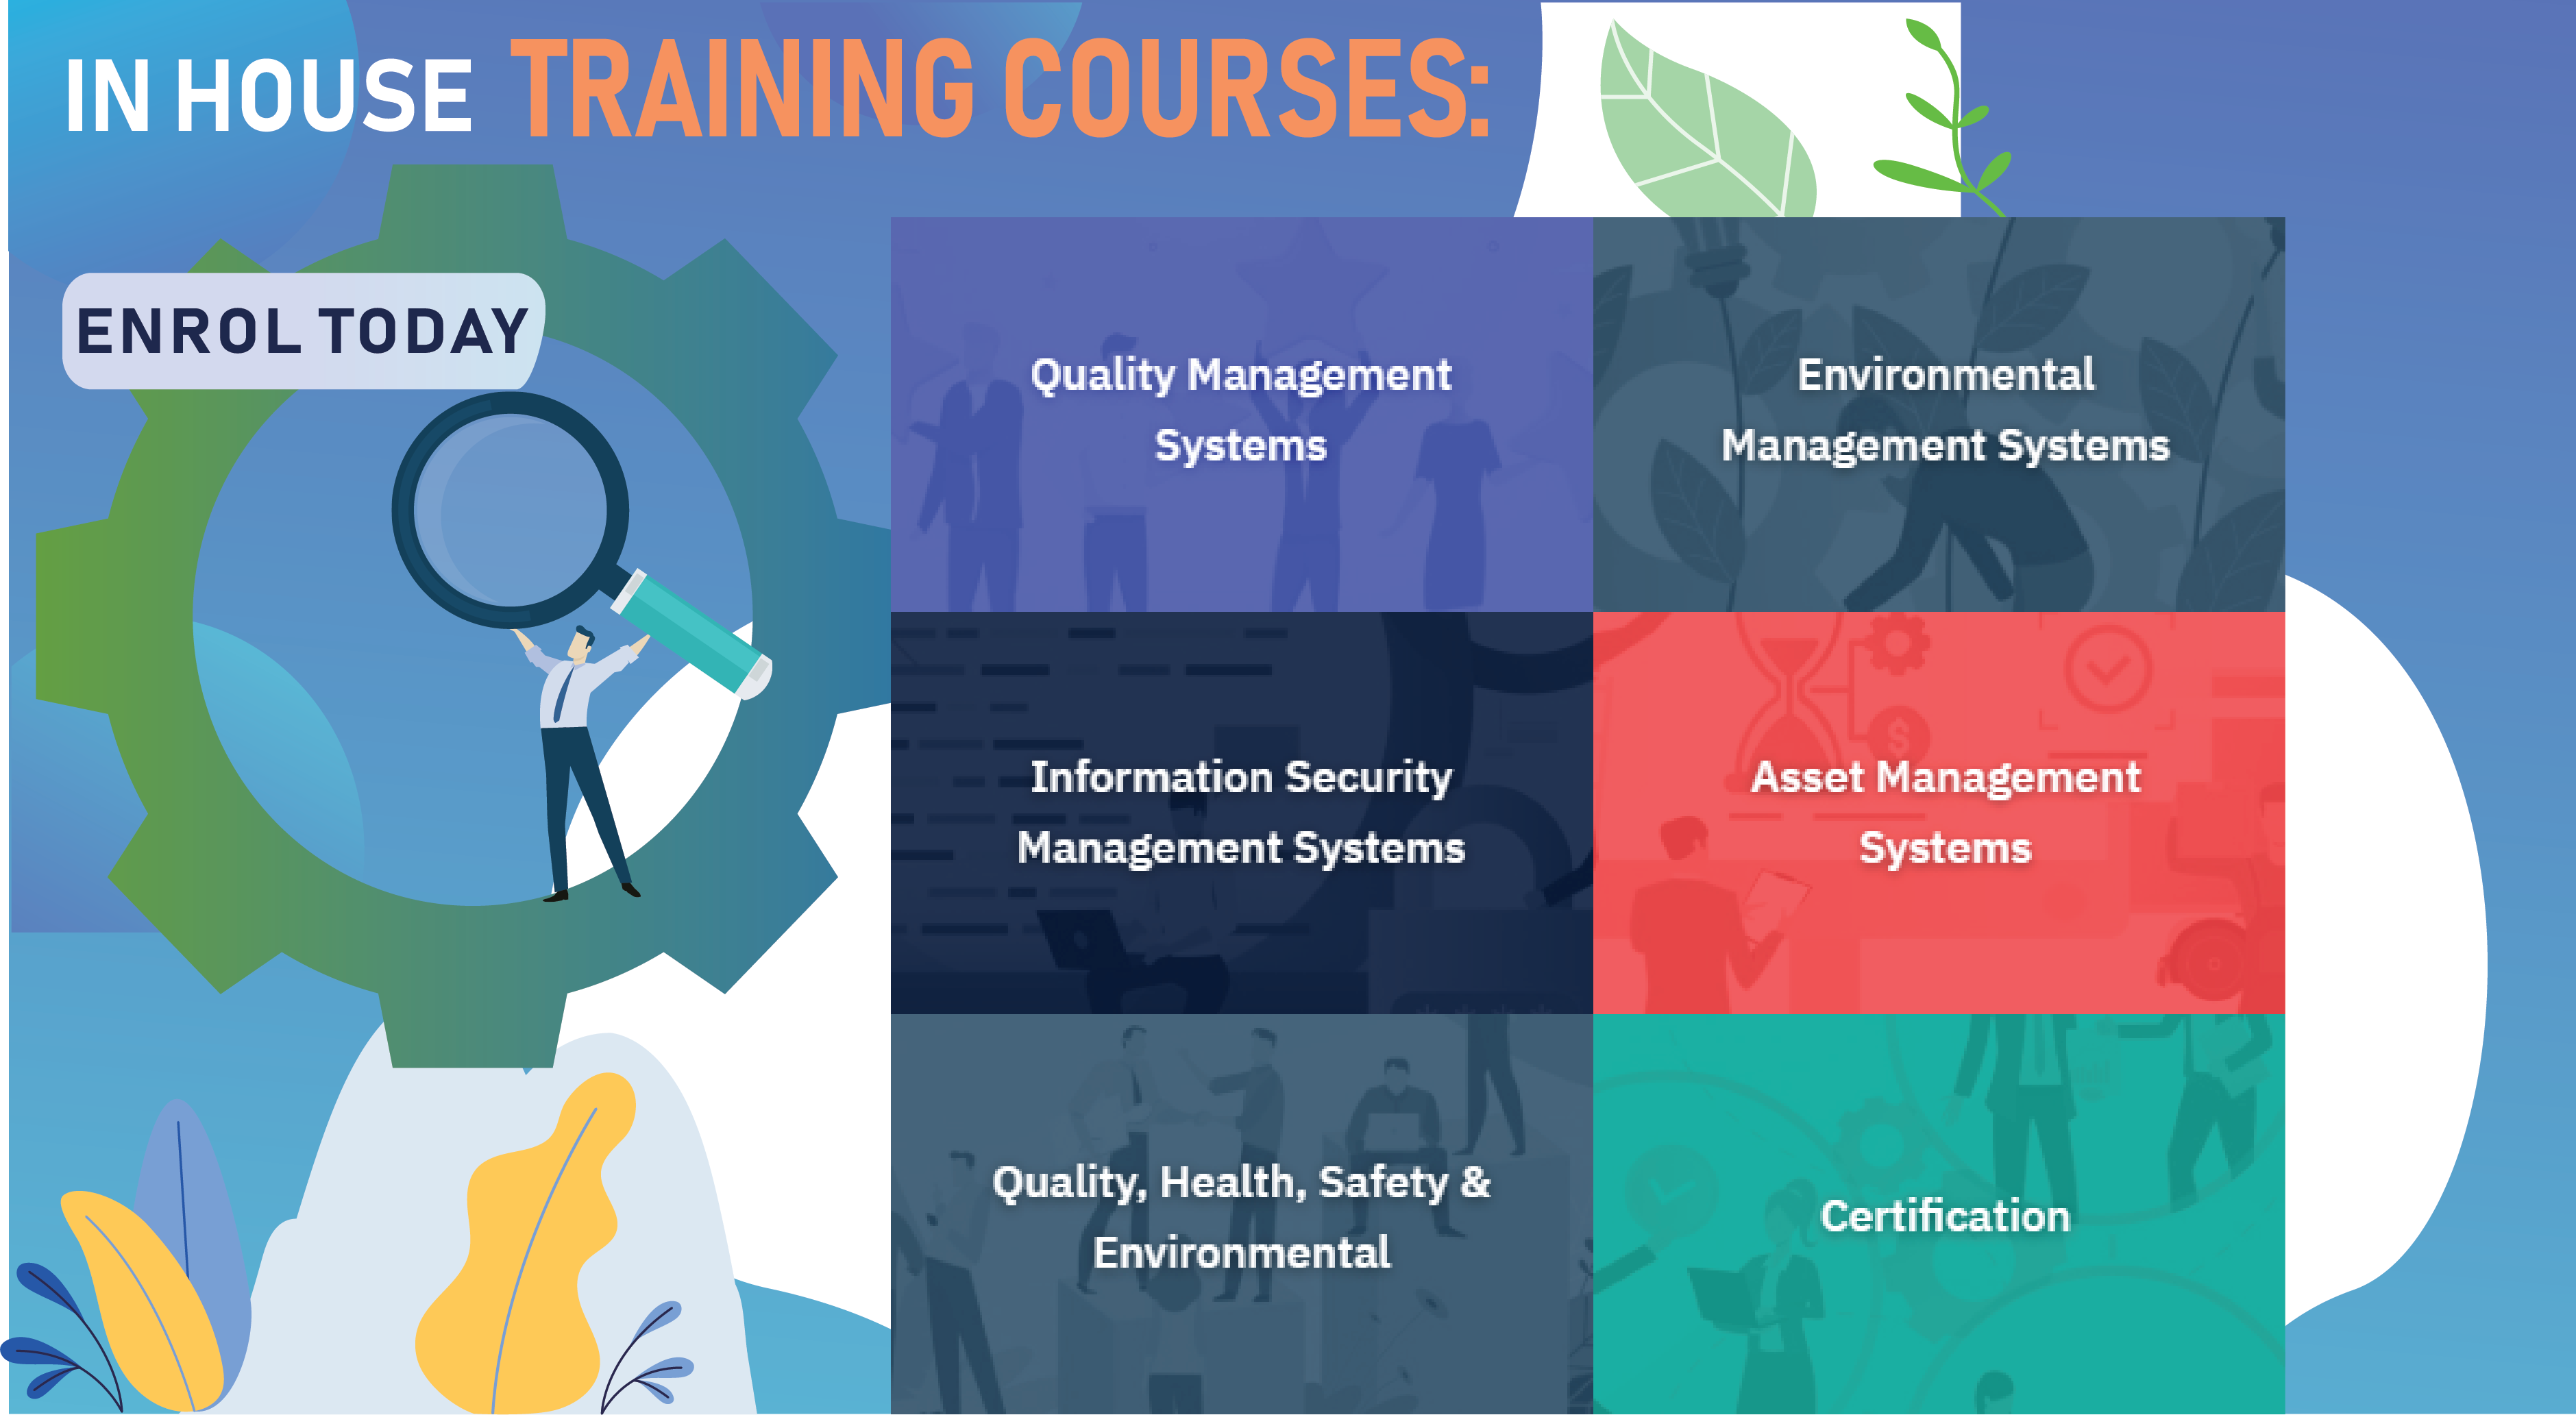 In House Training Courses